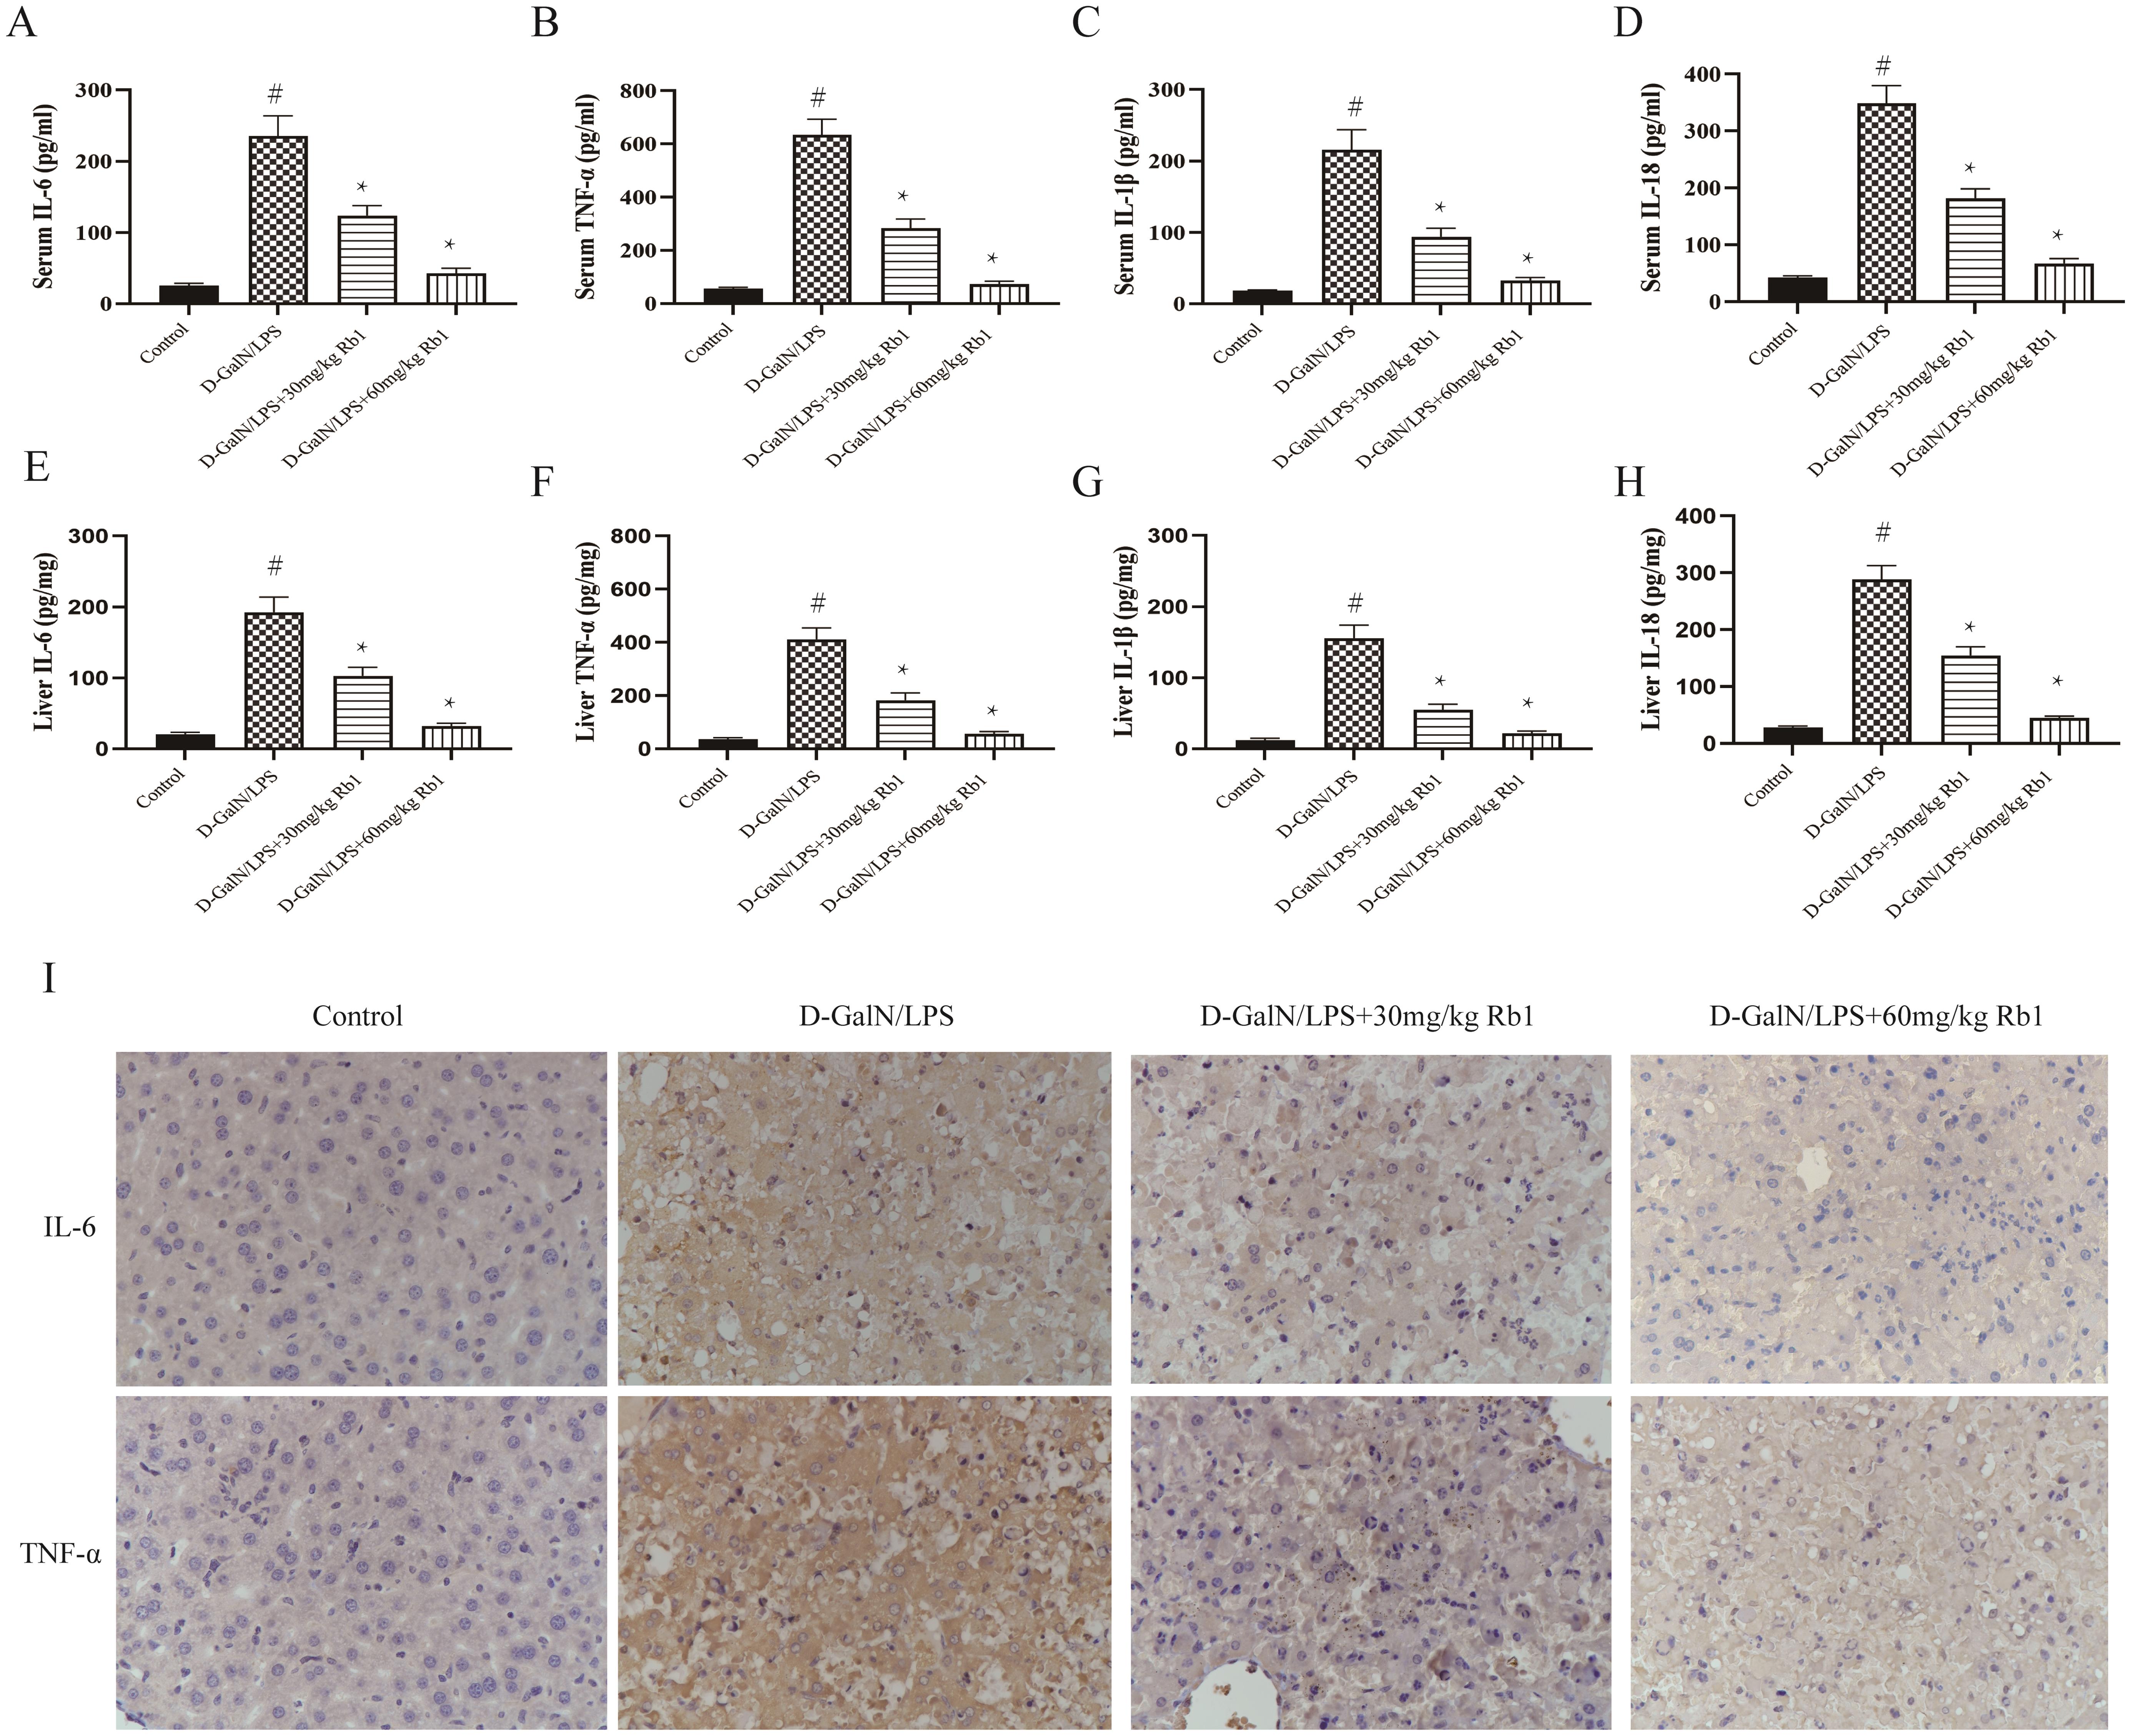 Effect of Rb1 on inflammatory cytokine expression in serum and liver tissue of ALI mice.